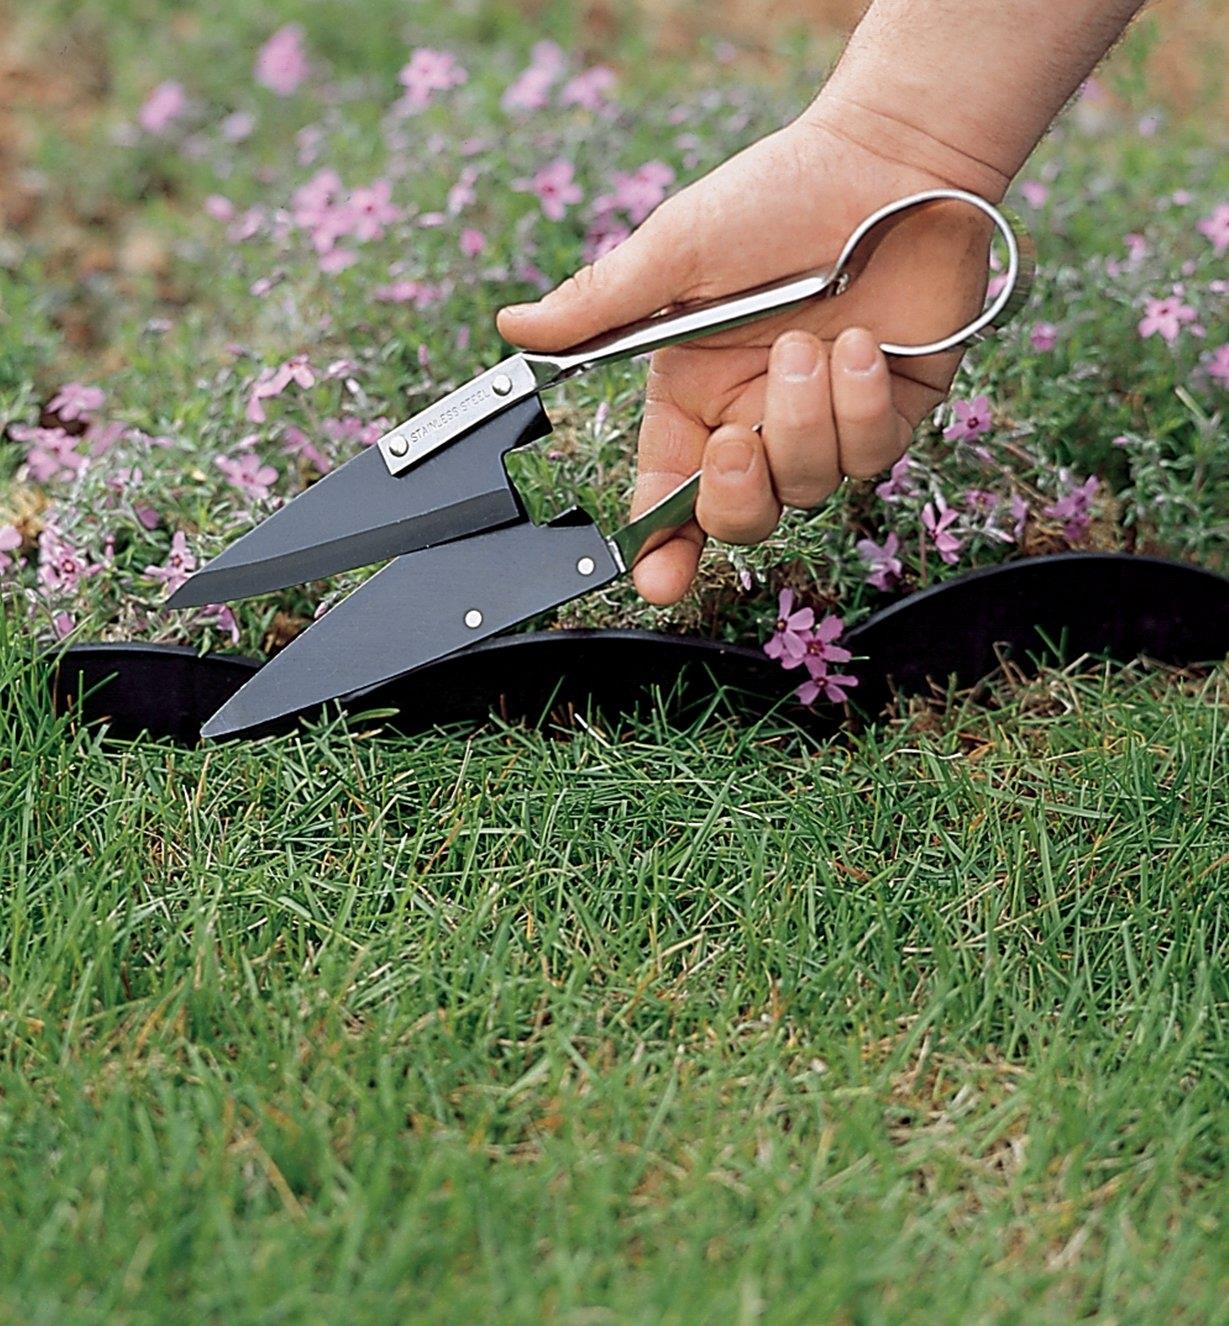 EC530 - Old-Fashioned Grass Clippers